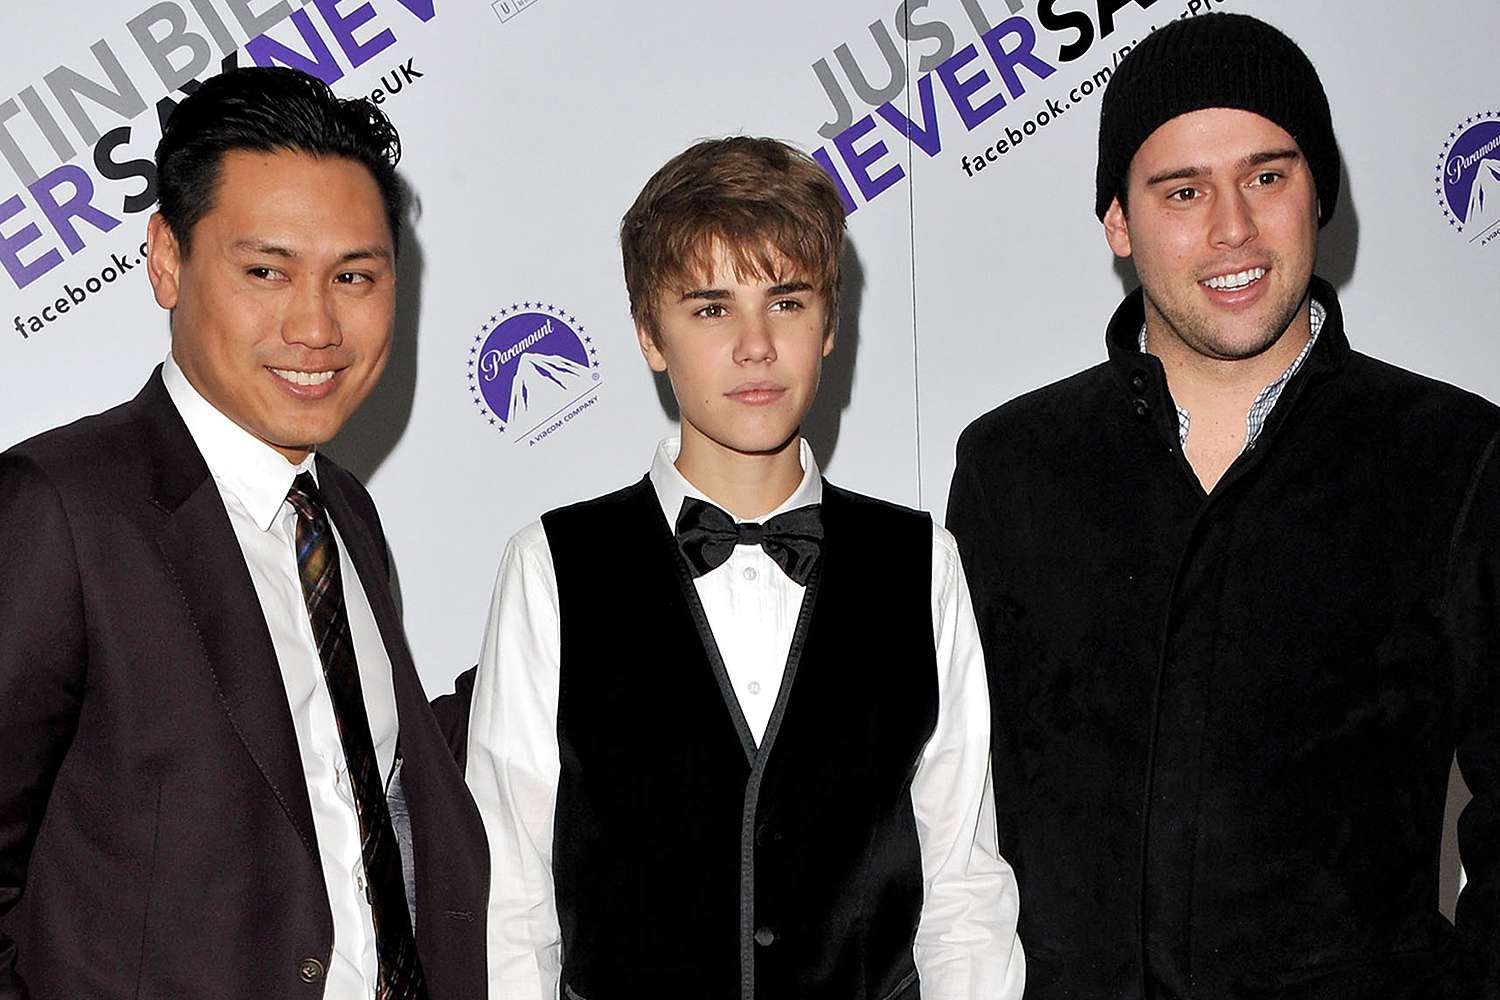 How Jon M. Chu Convinced Justin Bieber's Manager to Let Him Direct 'Never Say Never' Concert Film